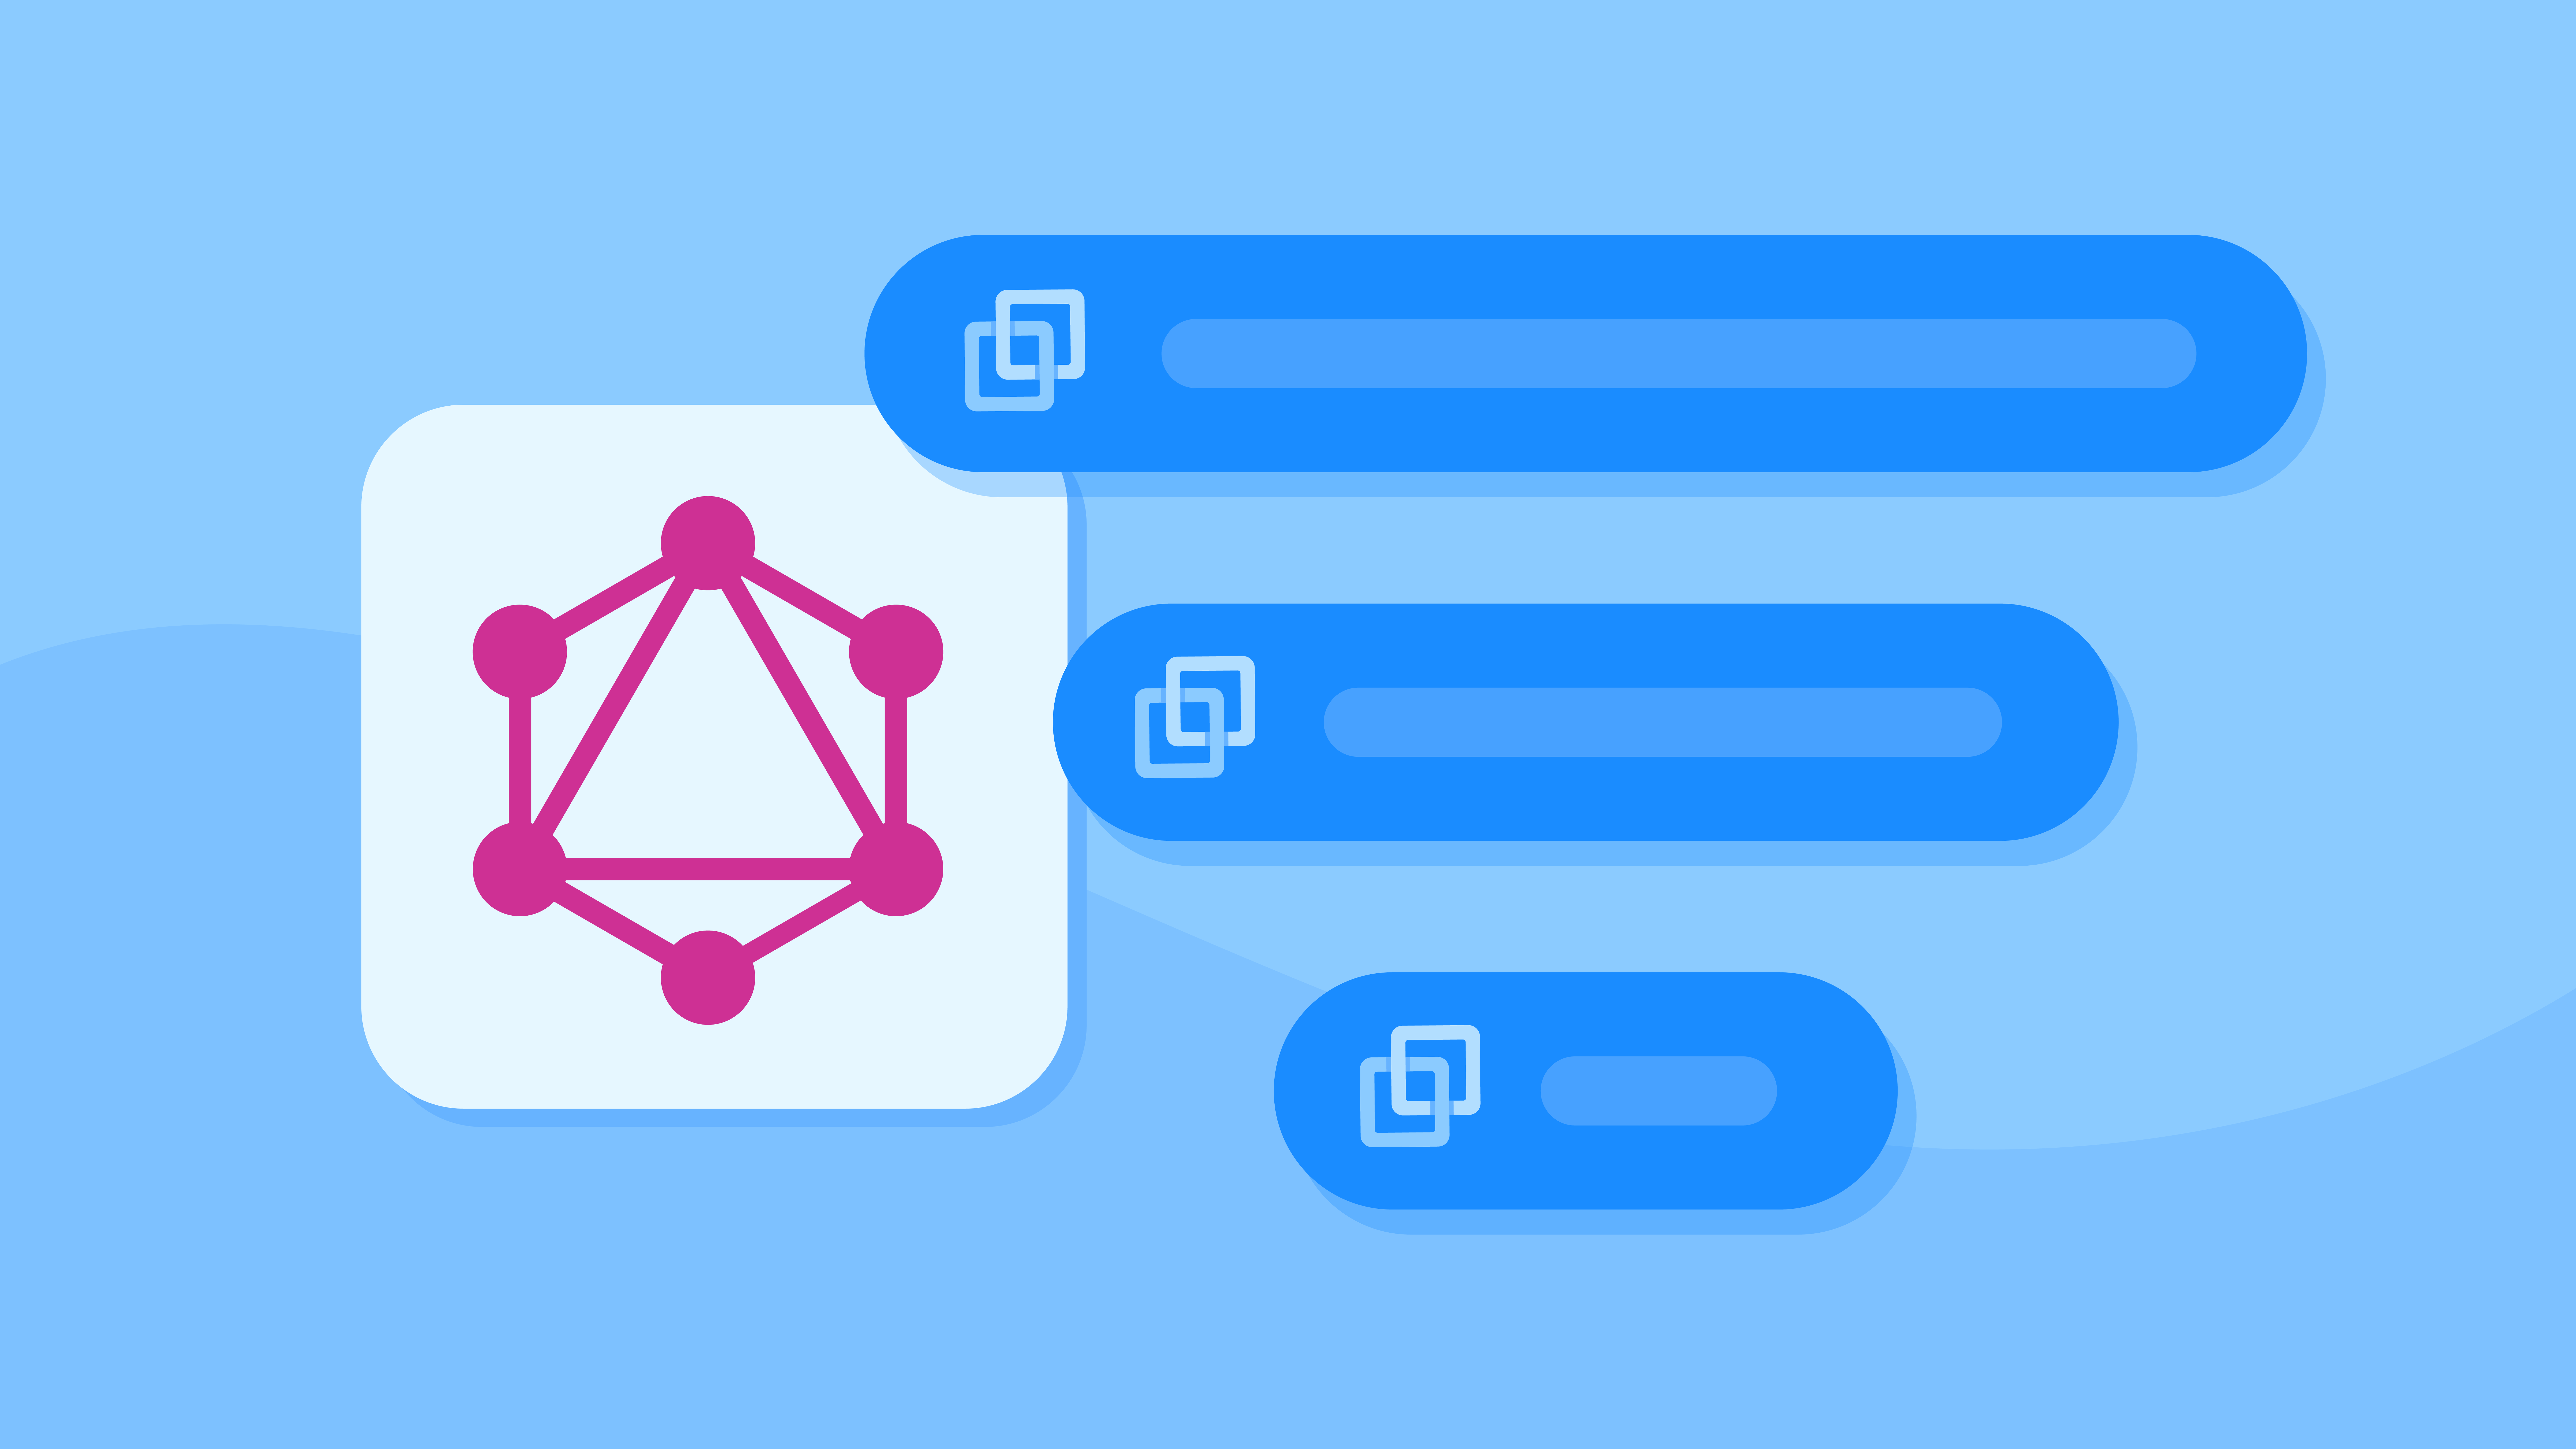 Illustration of a GraphQL logo with menu options to the right of it